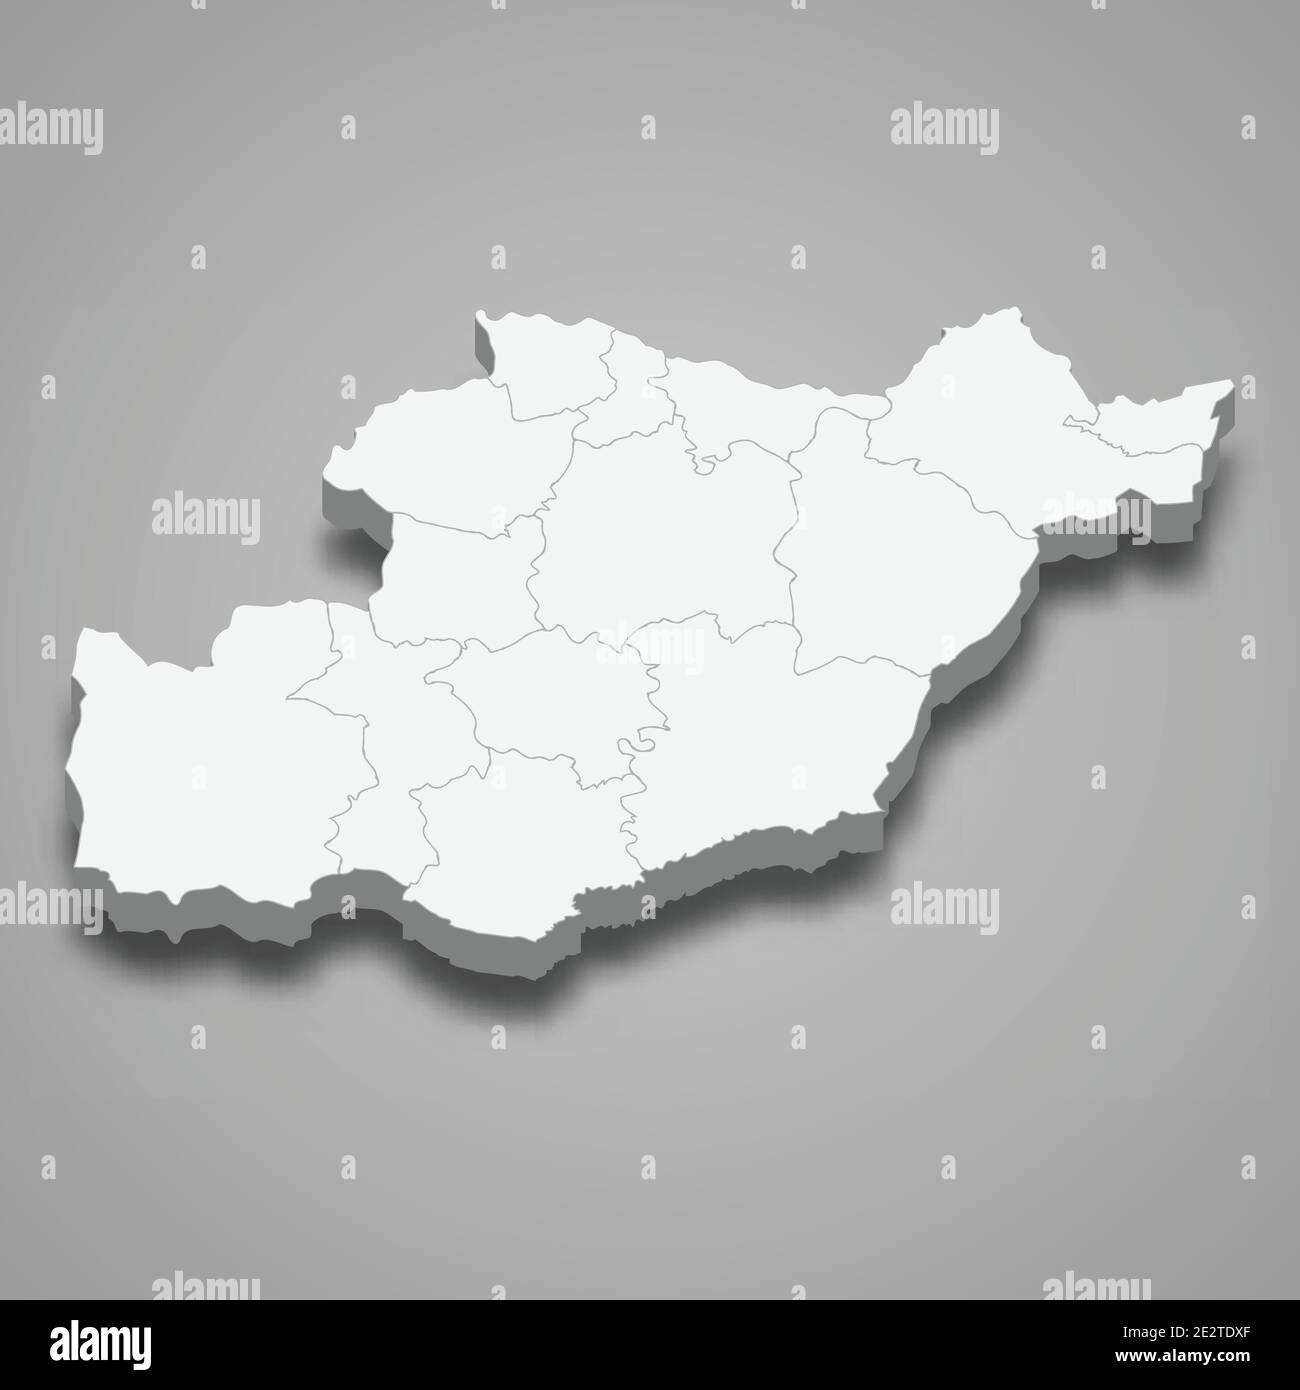 Portugal Map Vector Hd Images, Portugal Map In Black, Clip